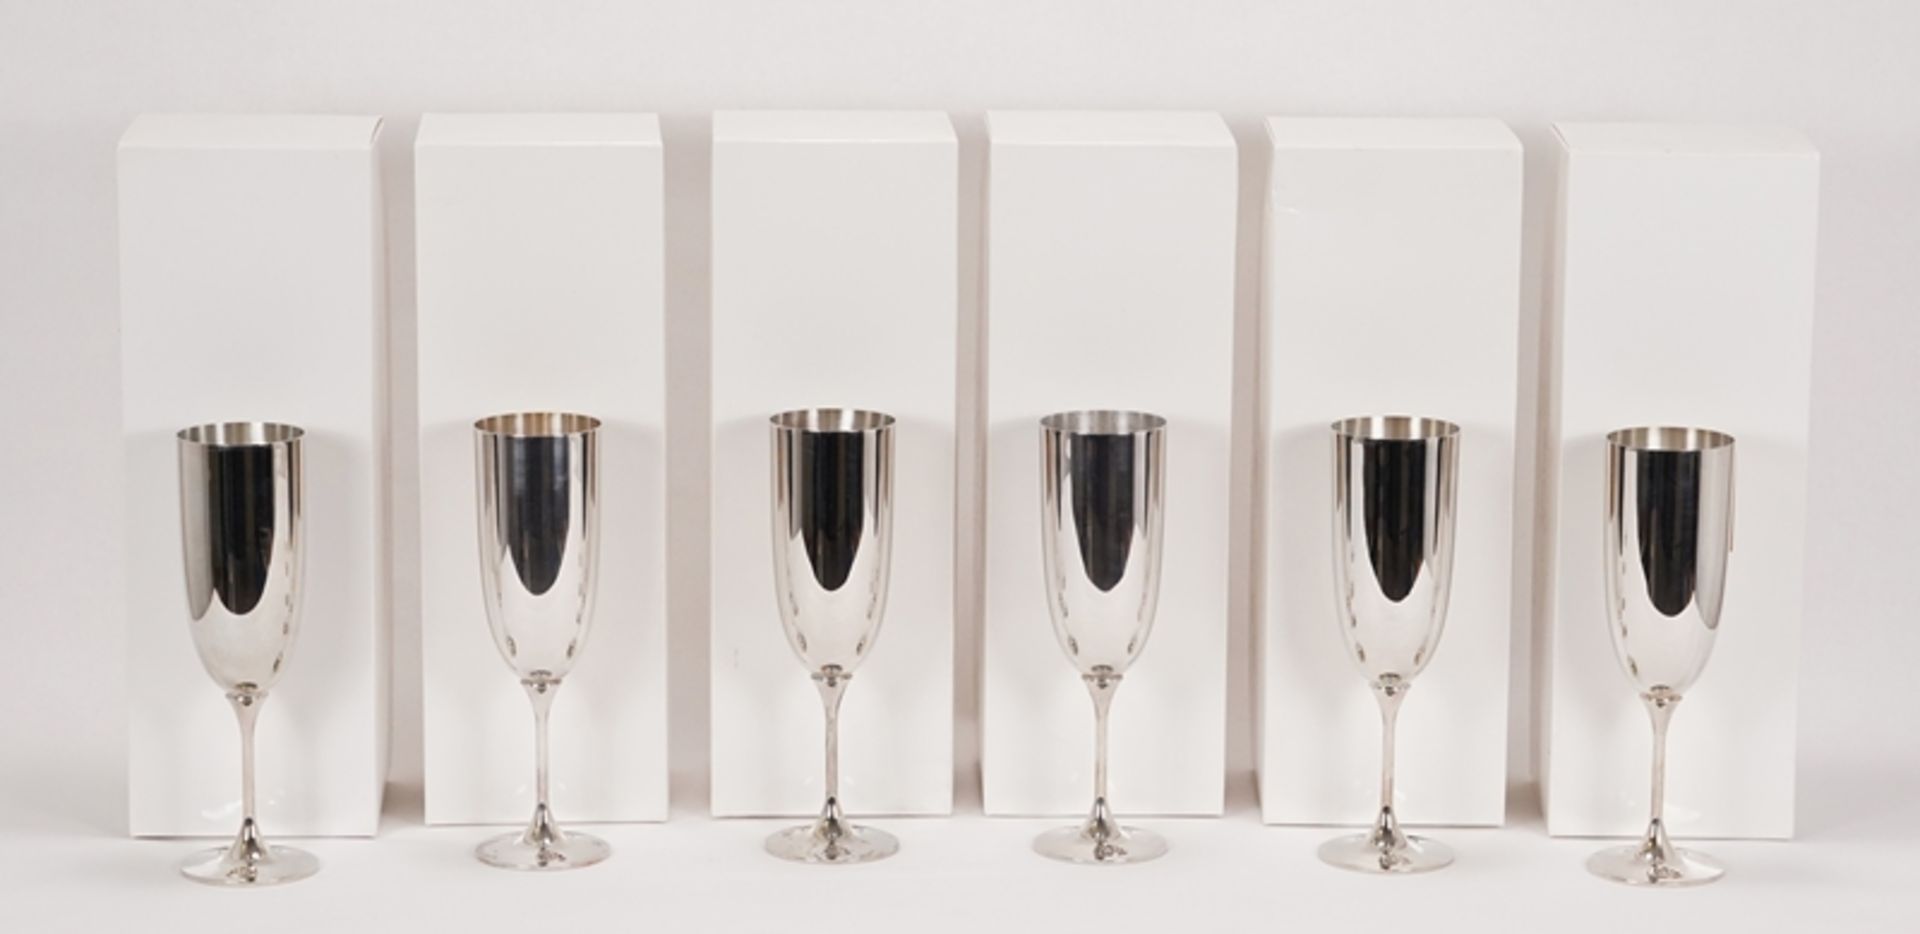 Sechs Champagnerkelche | Six champagne goblets